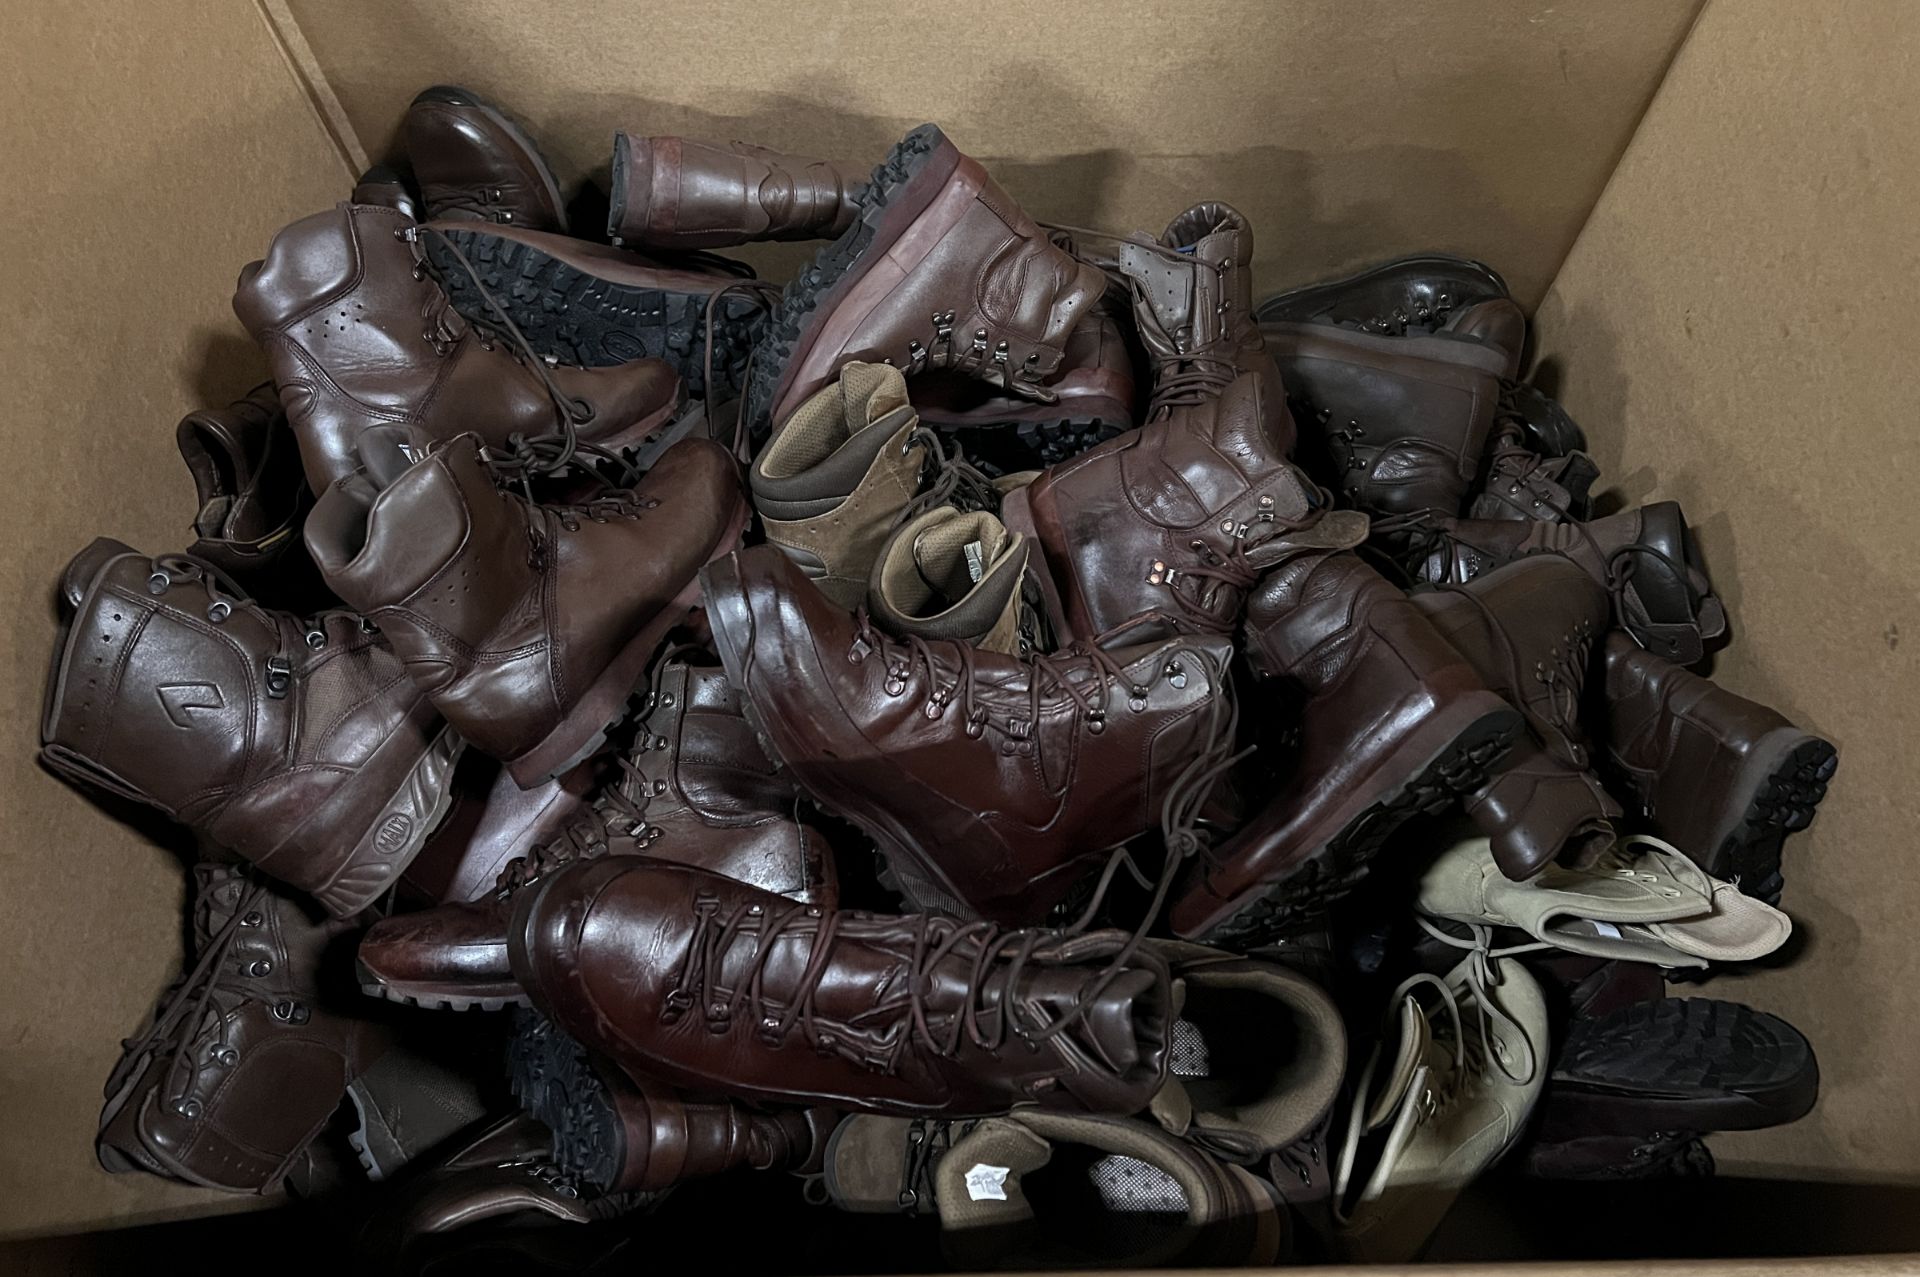 Various boots - Magnum, Haix, YDS - mixed and sizes - approx. 50 pairs